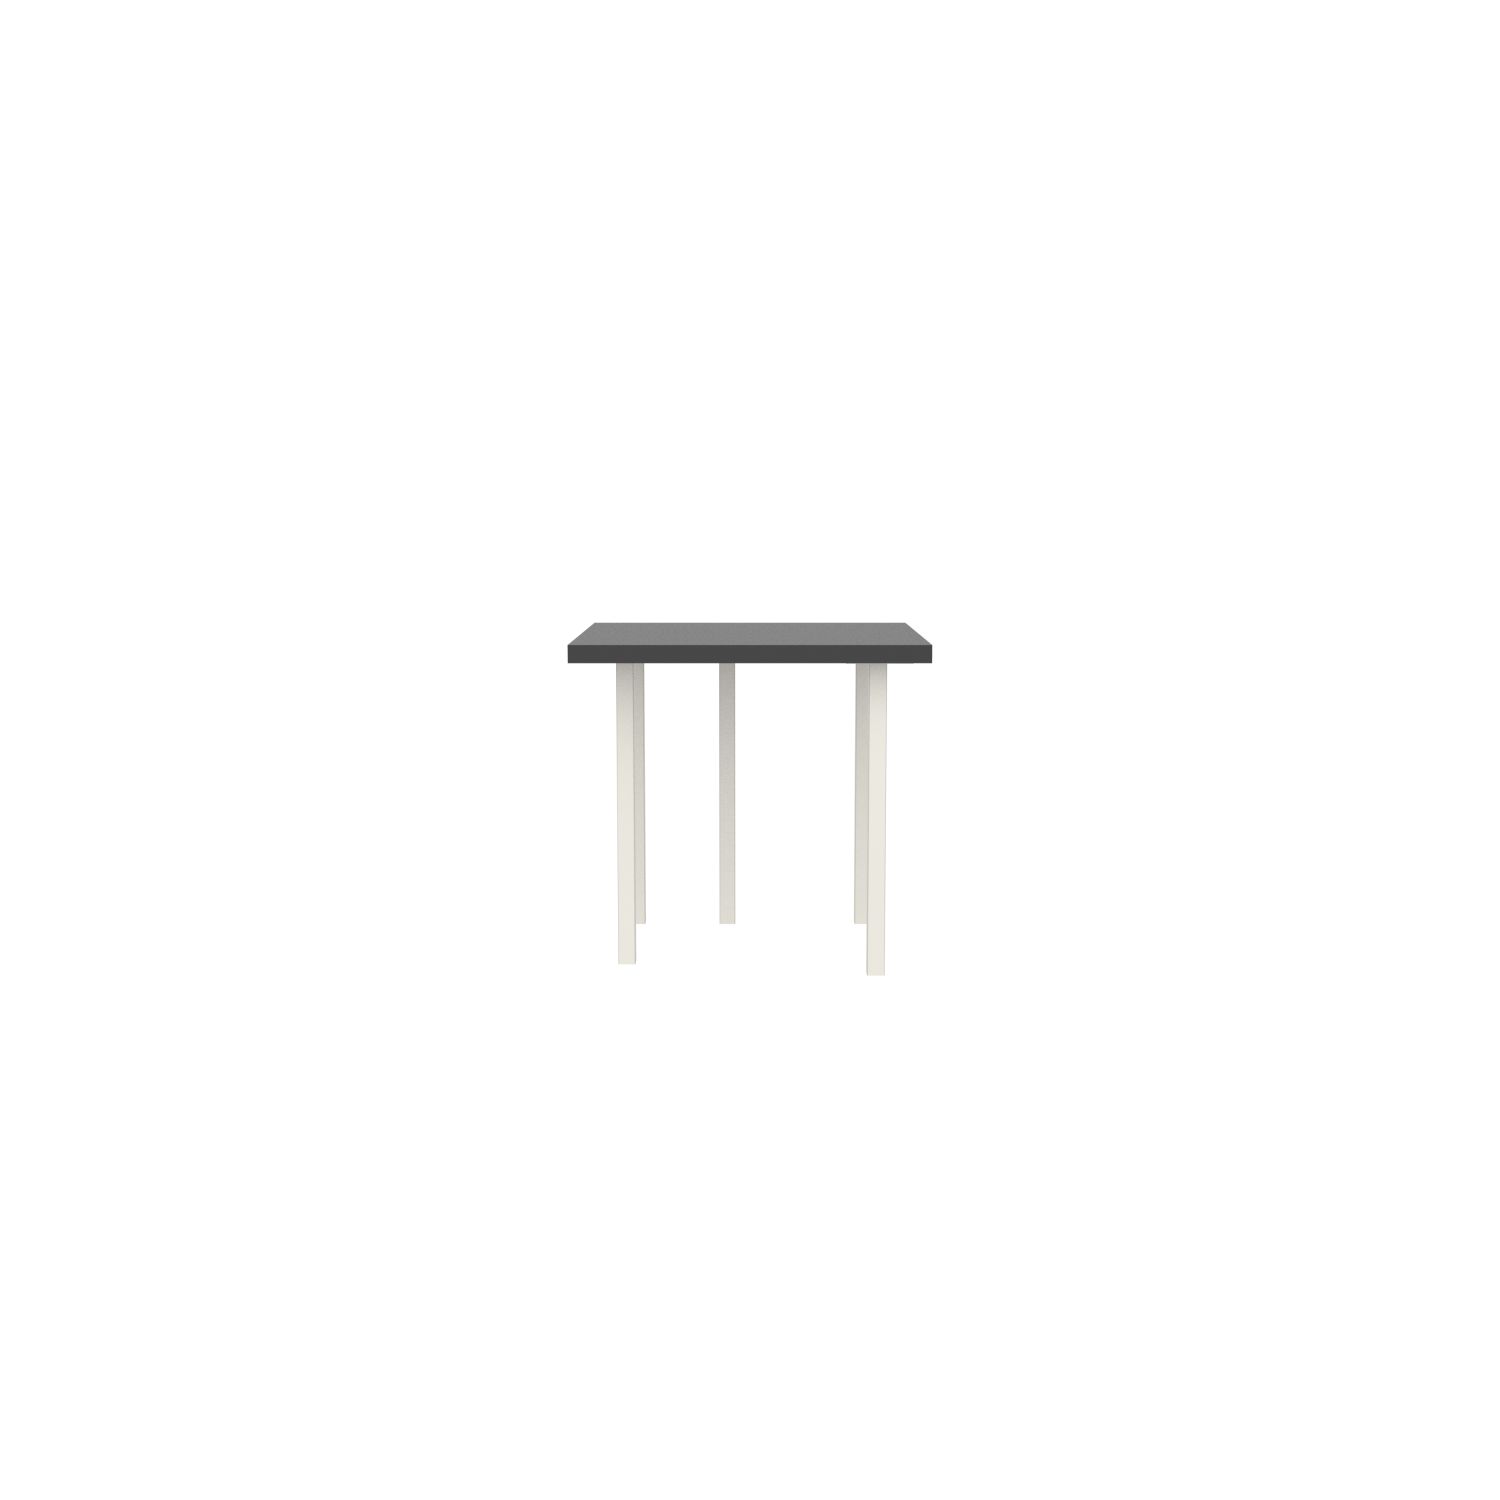 lensvelt bbrand table five fixed heigt 80x80 hpl black 50 mm price level 1 white ral9010